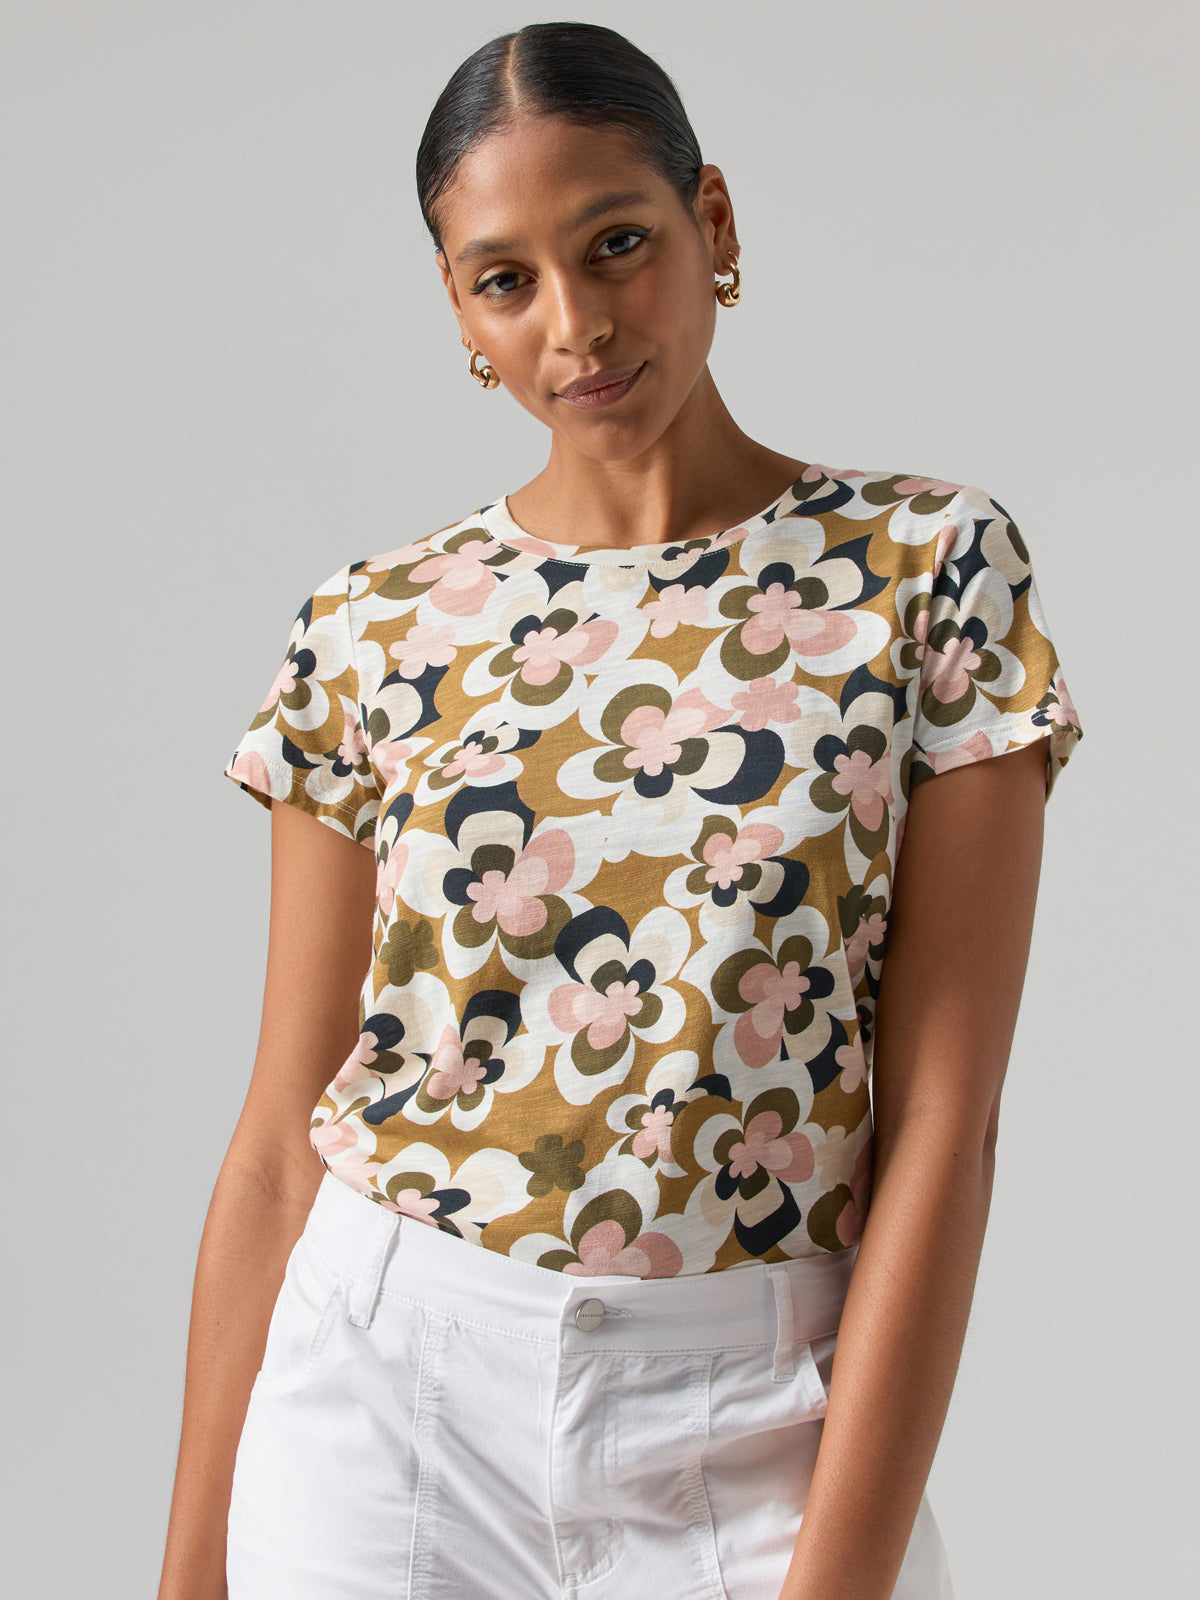 The Perfect Tee Renew Flower Power